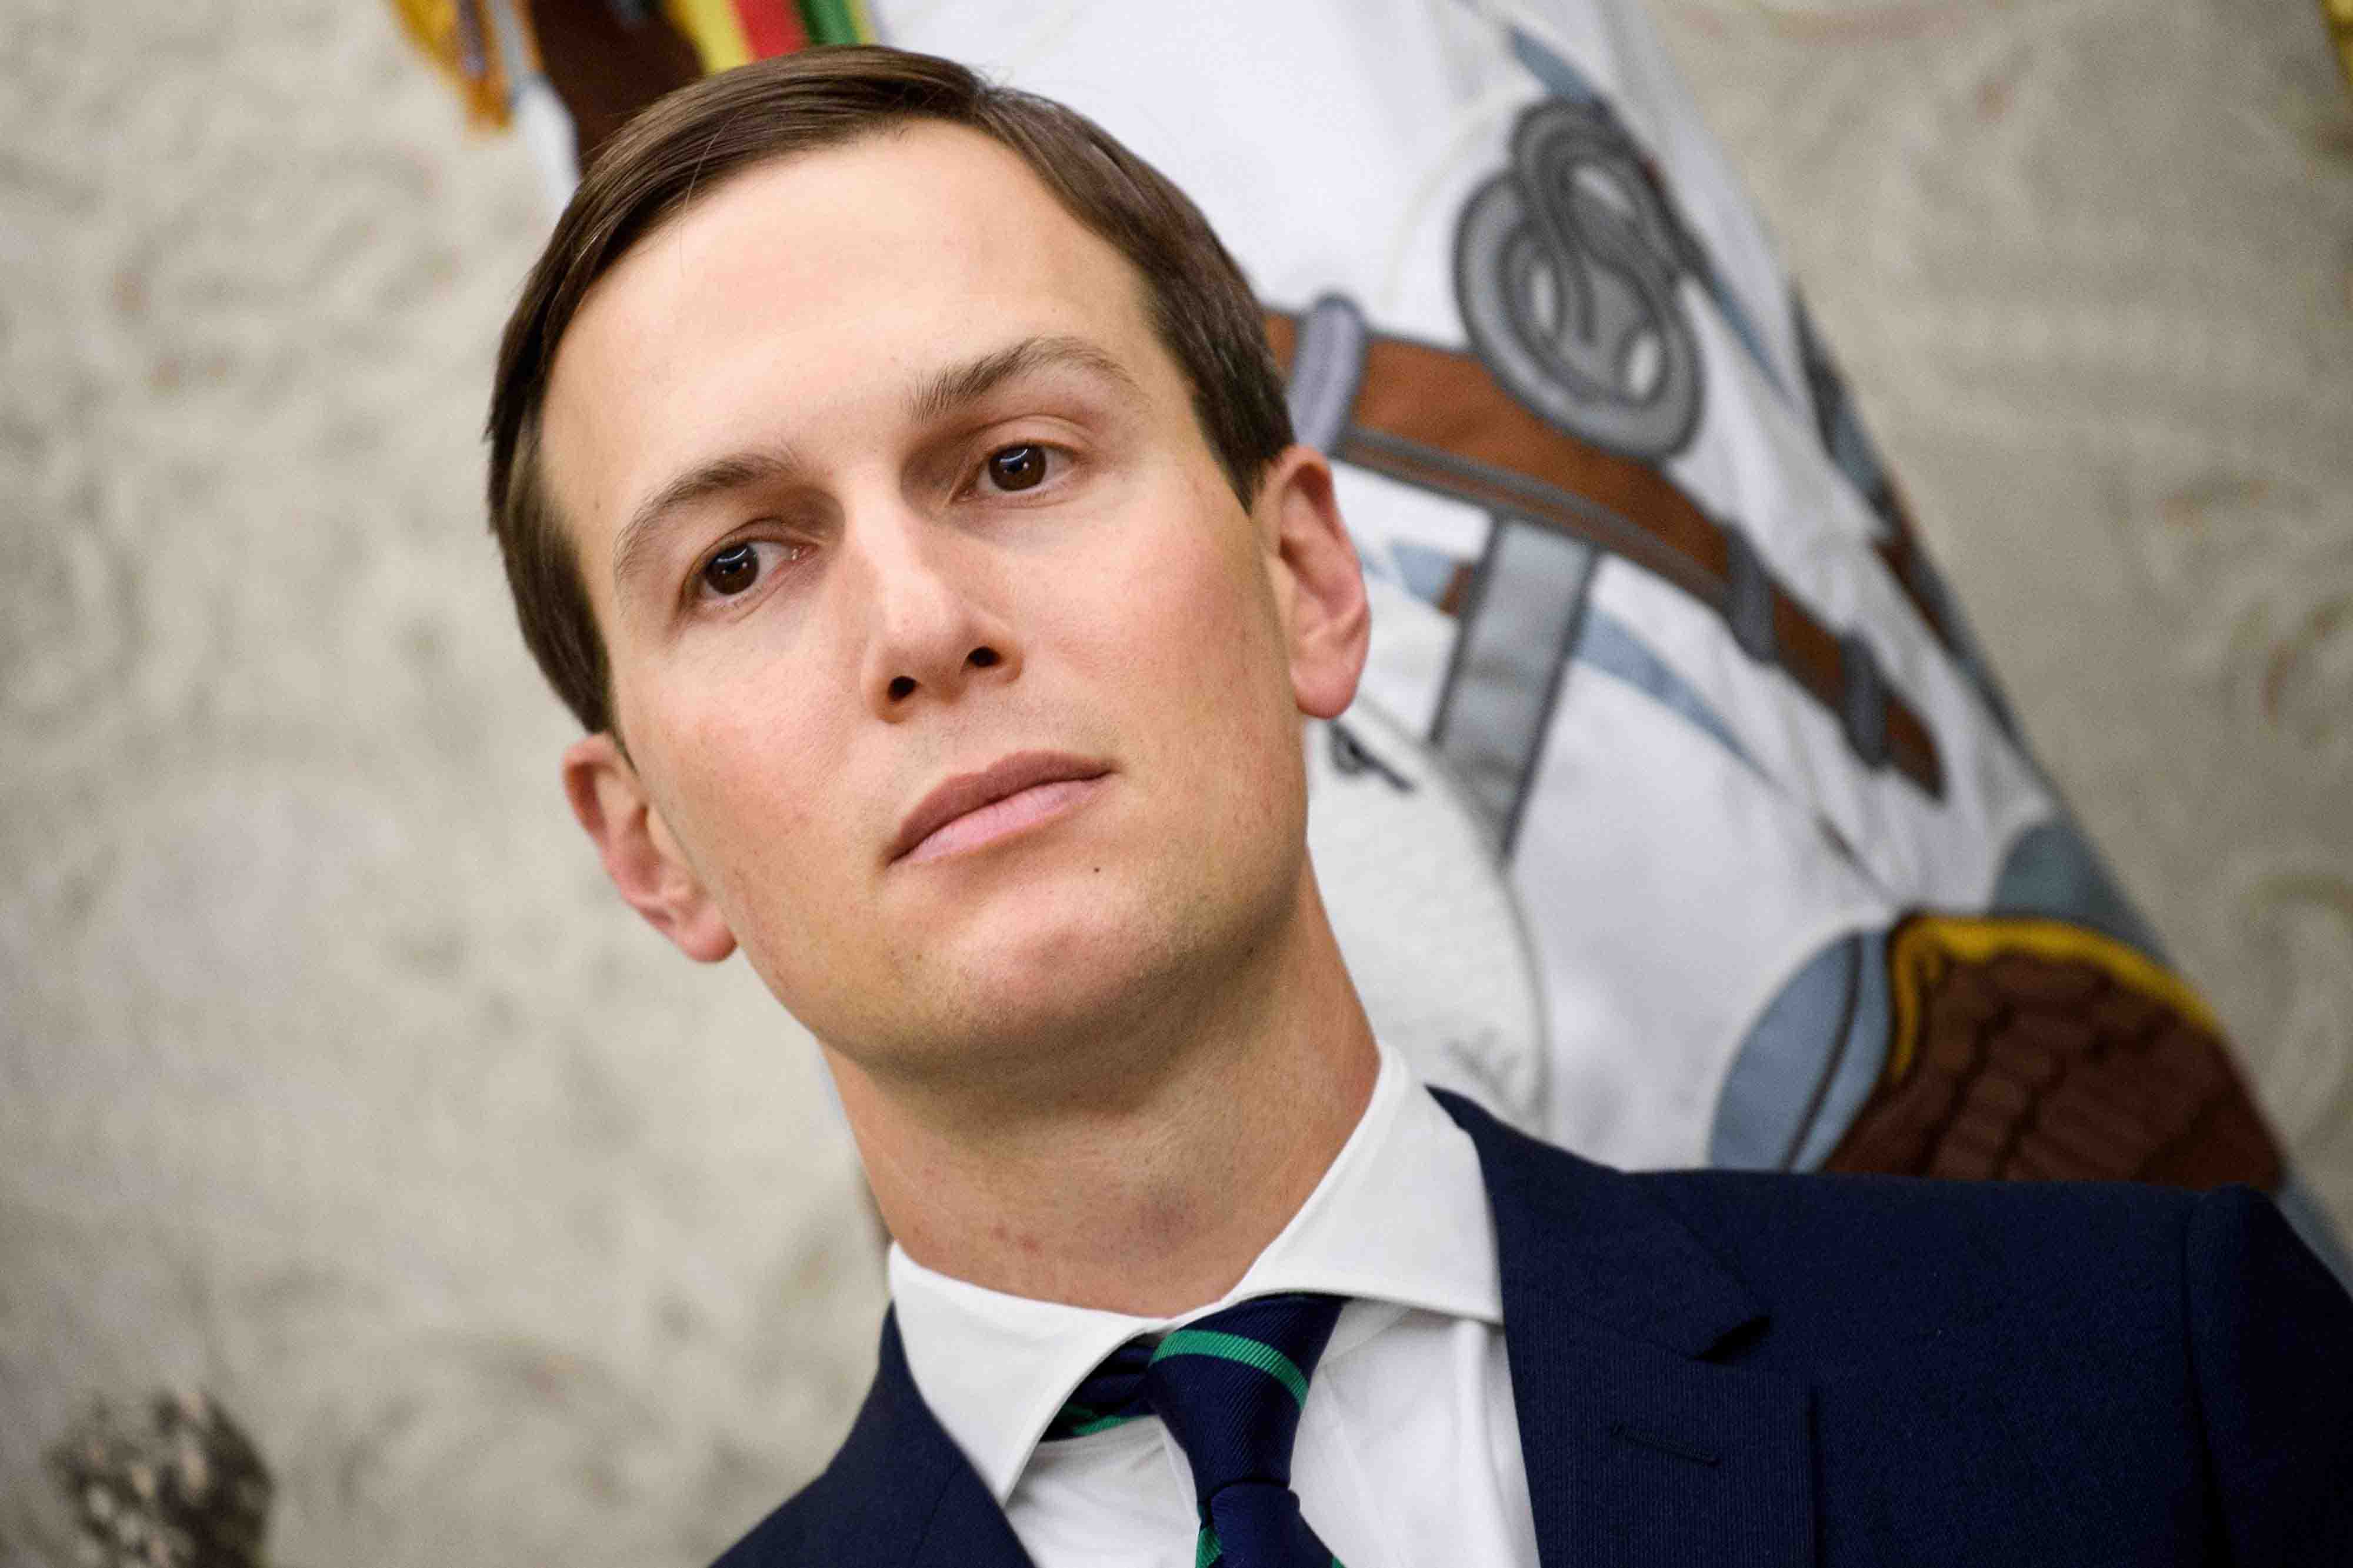 Kushner is returning to the Middle East later this month to push his economic plan which has been rejected by the Palestinians